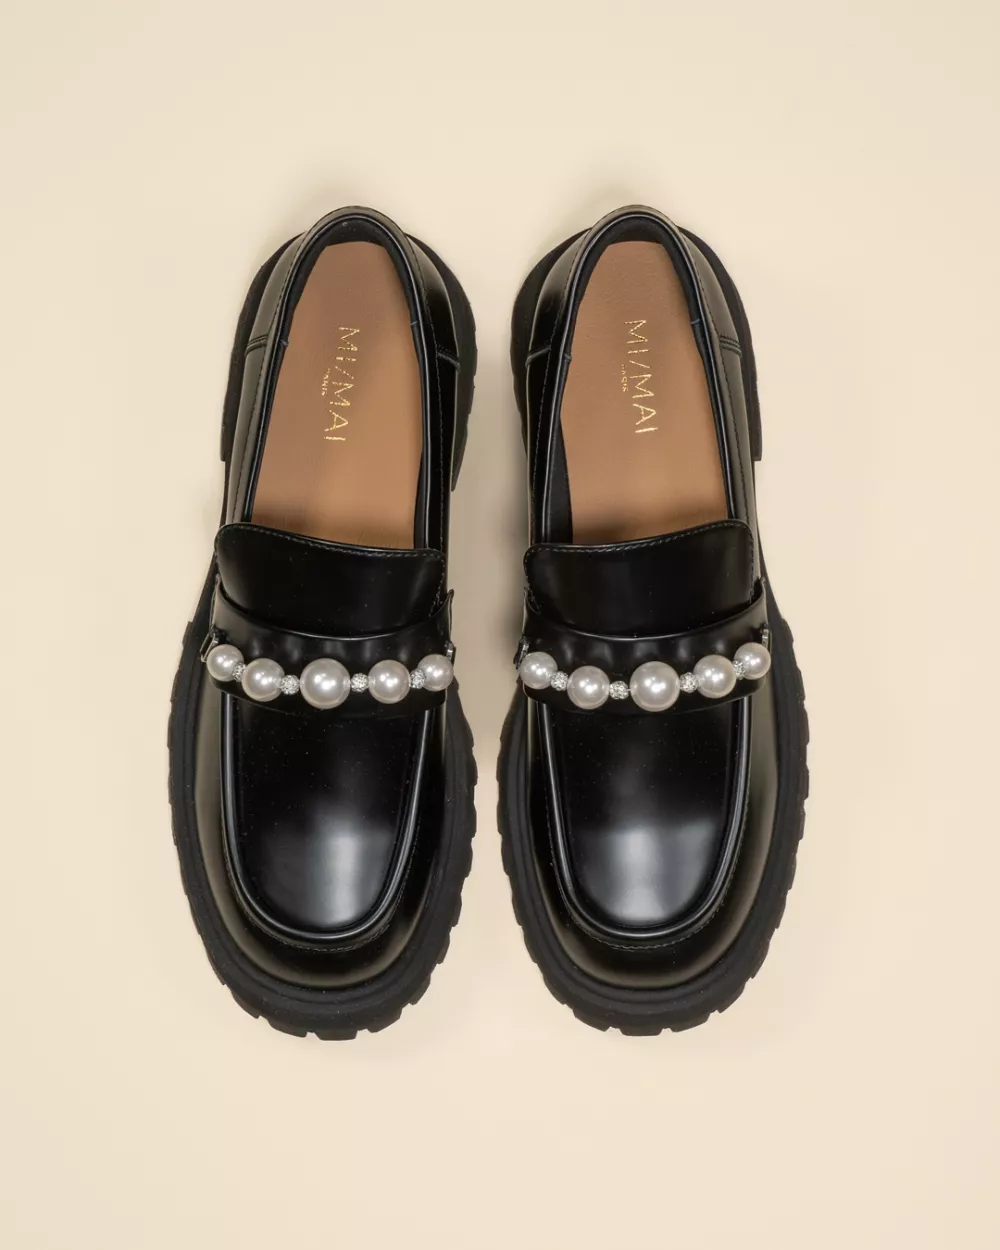 Tish Loafers